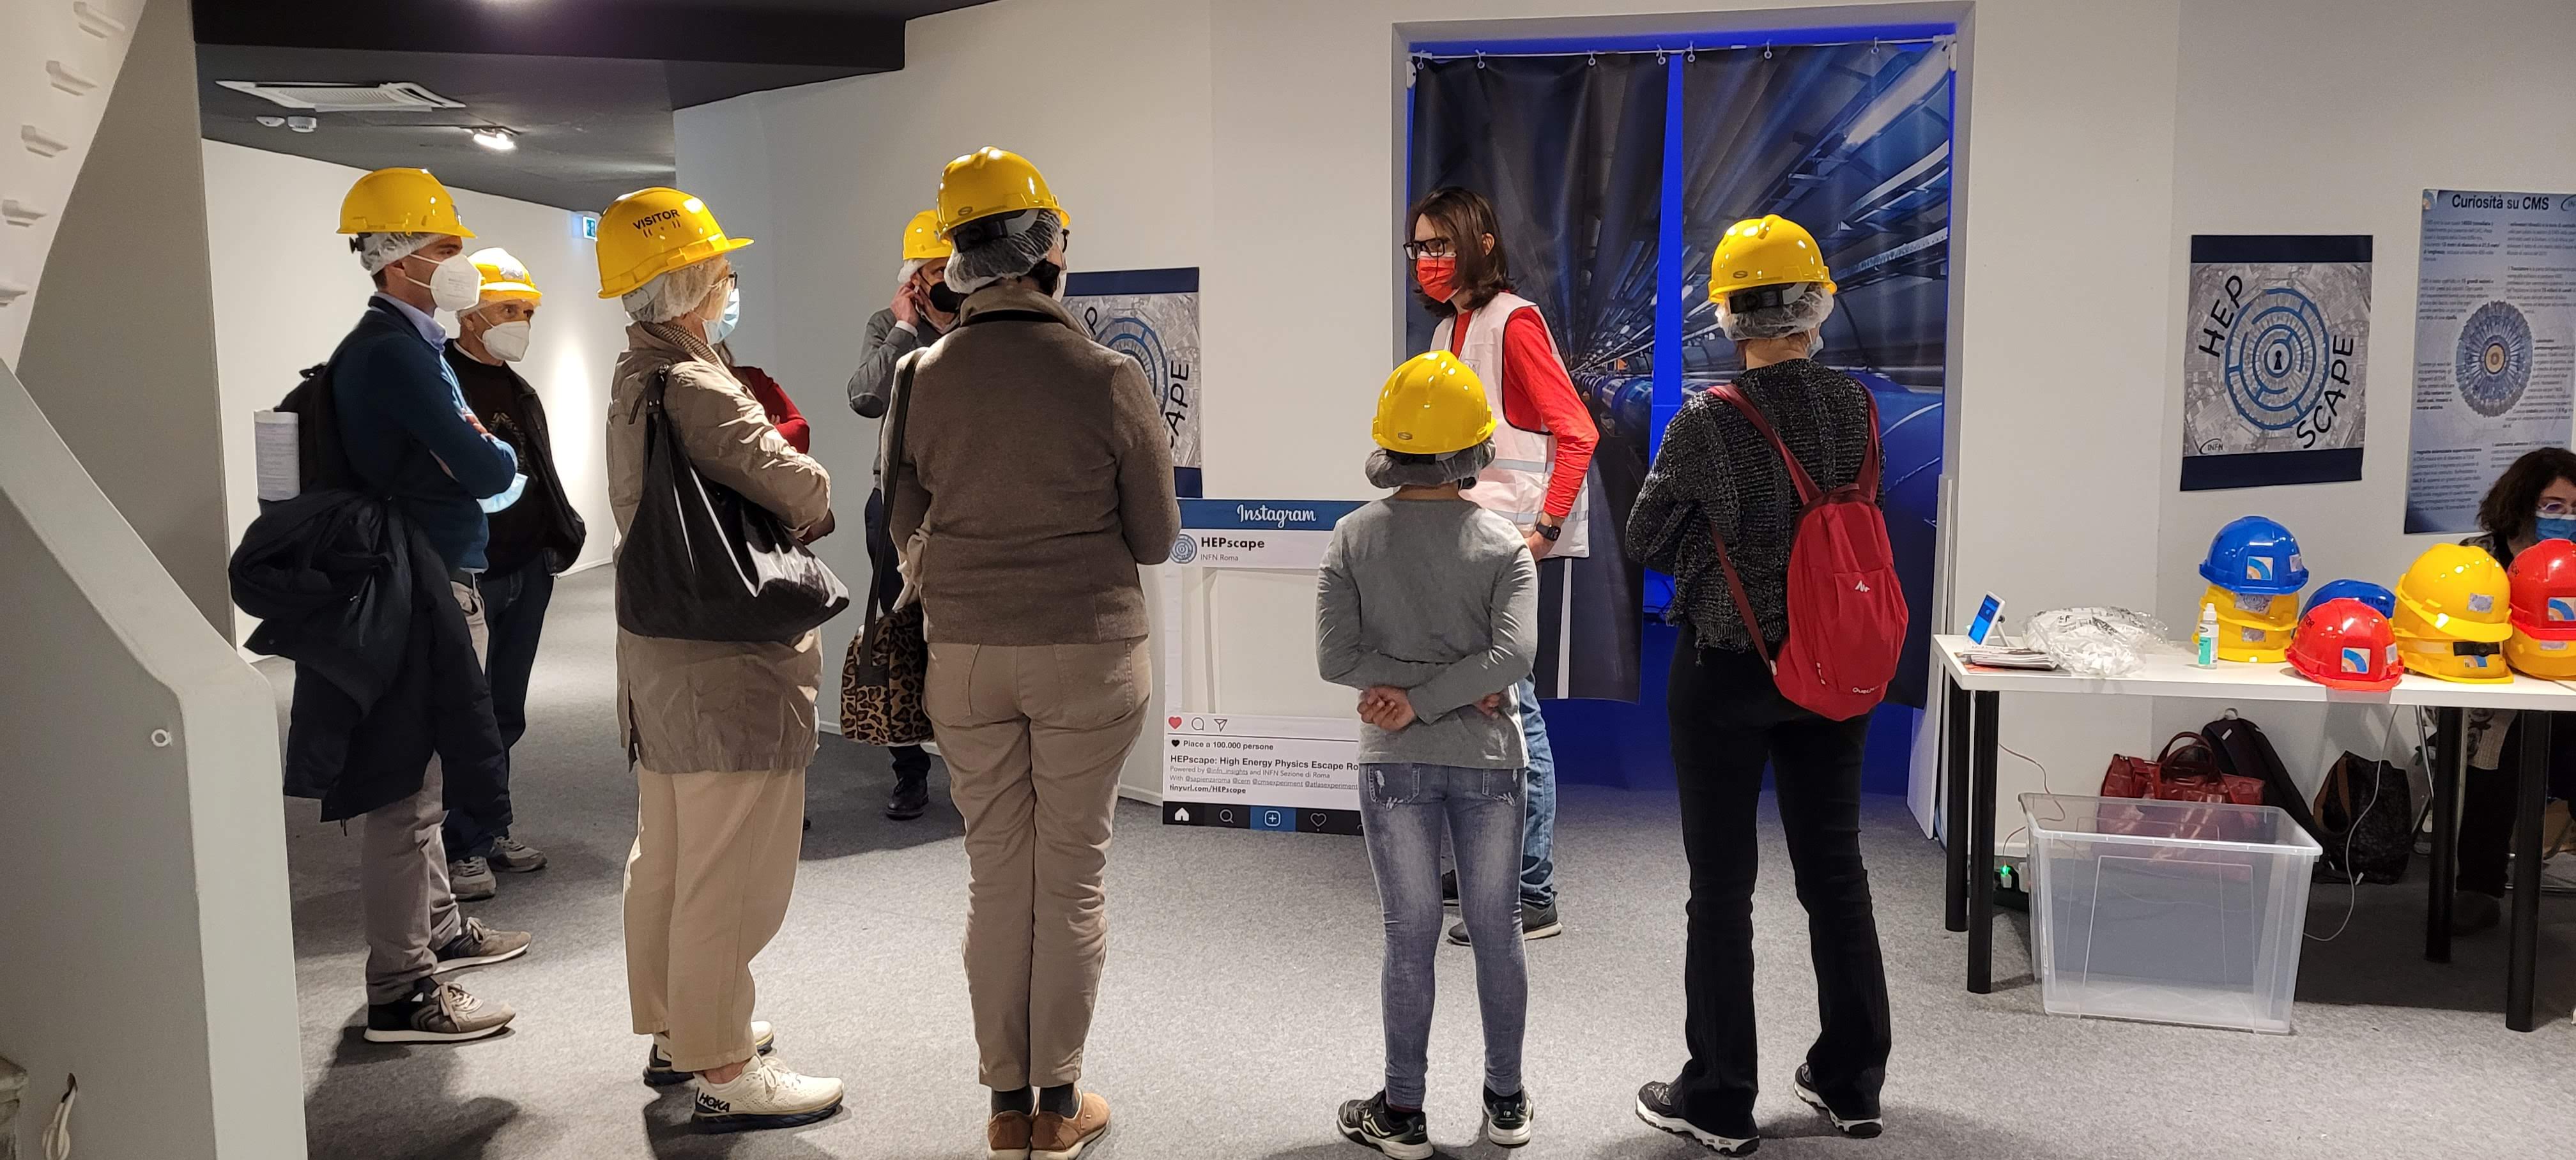 People in the entrance of the escape room wearing helmets